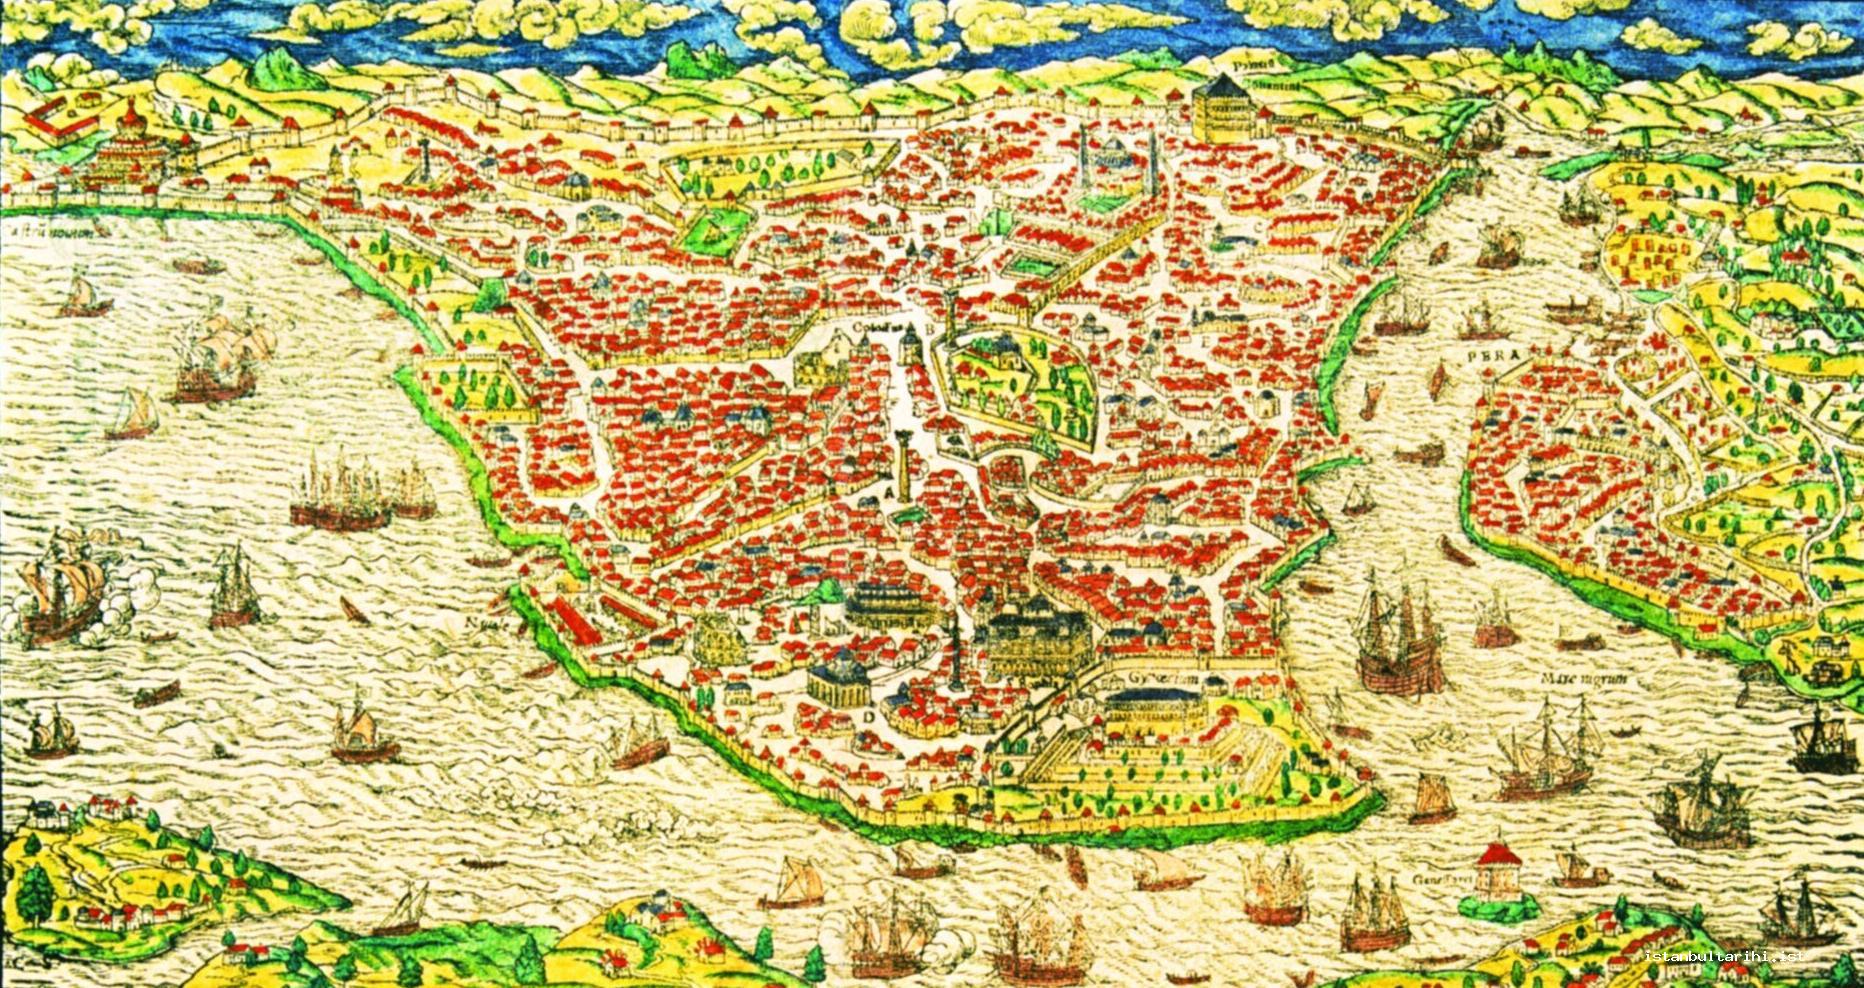 4- Sebastian Münster, an Overview of Istanbul, 1544, wood print